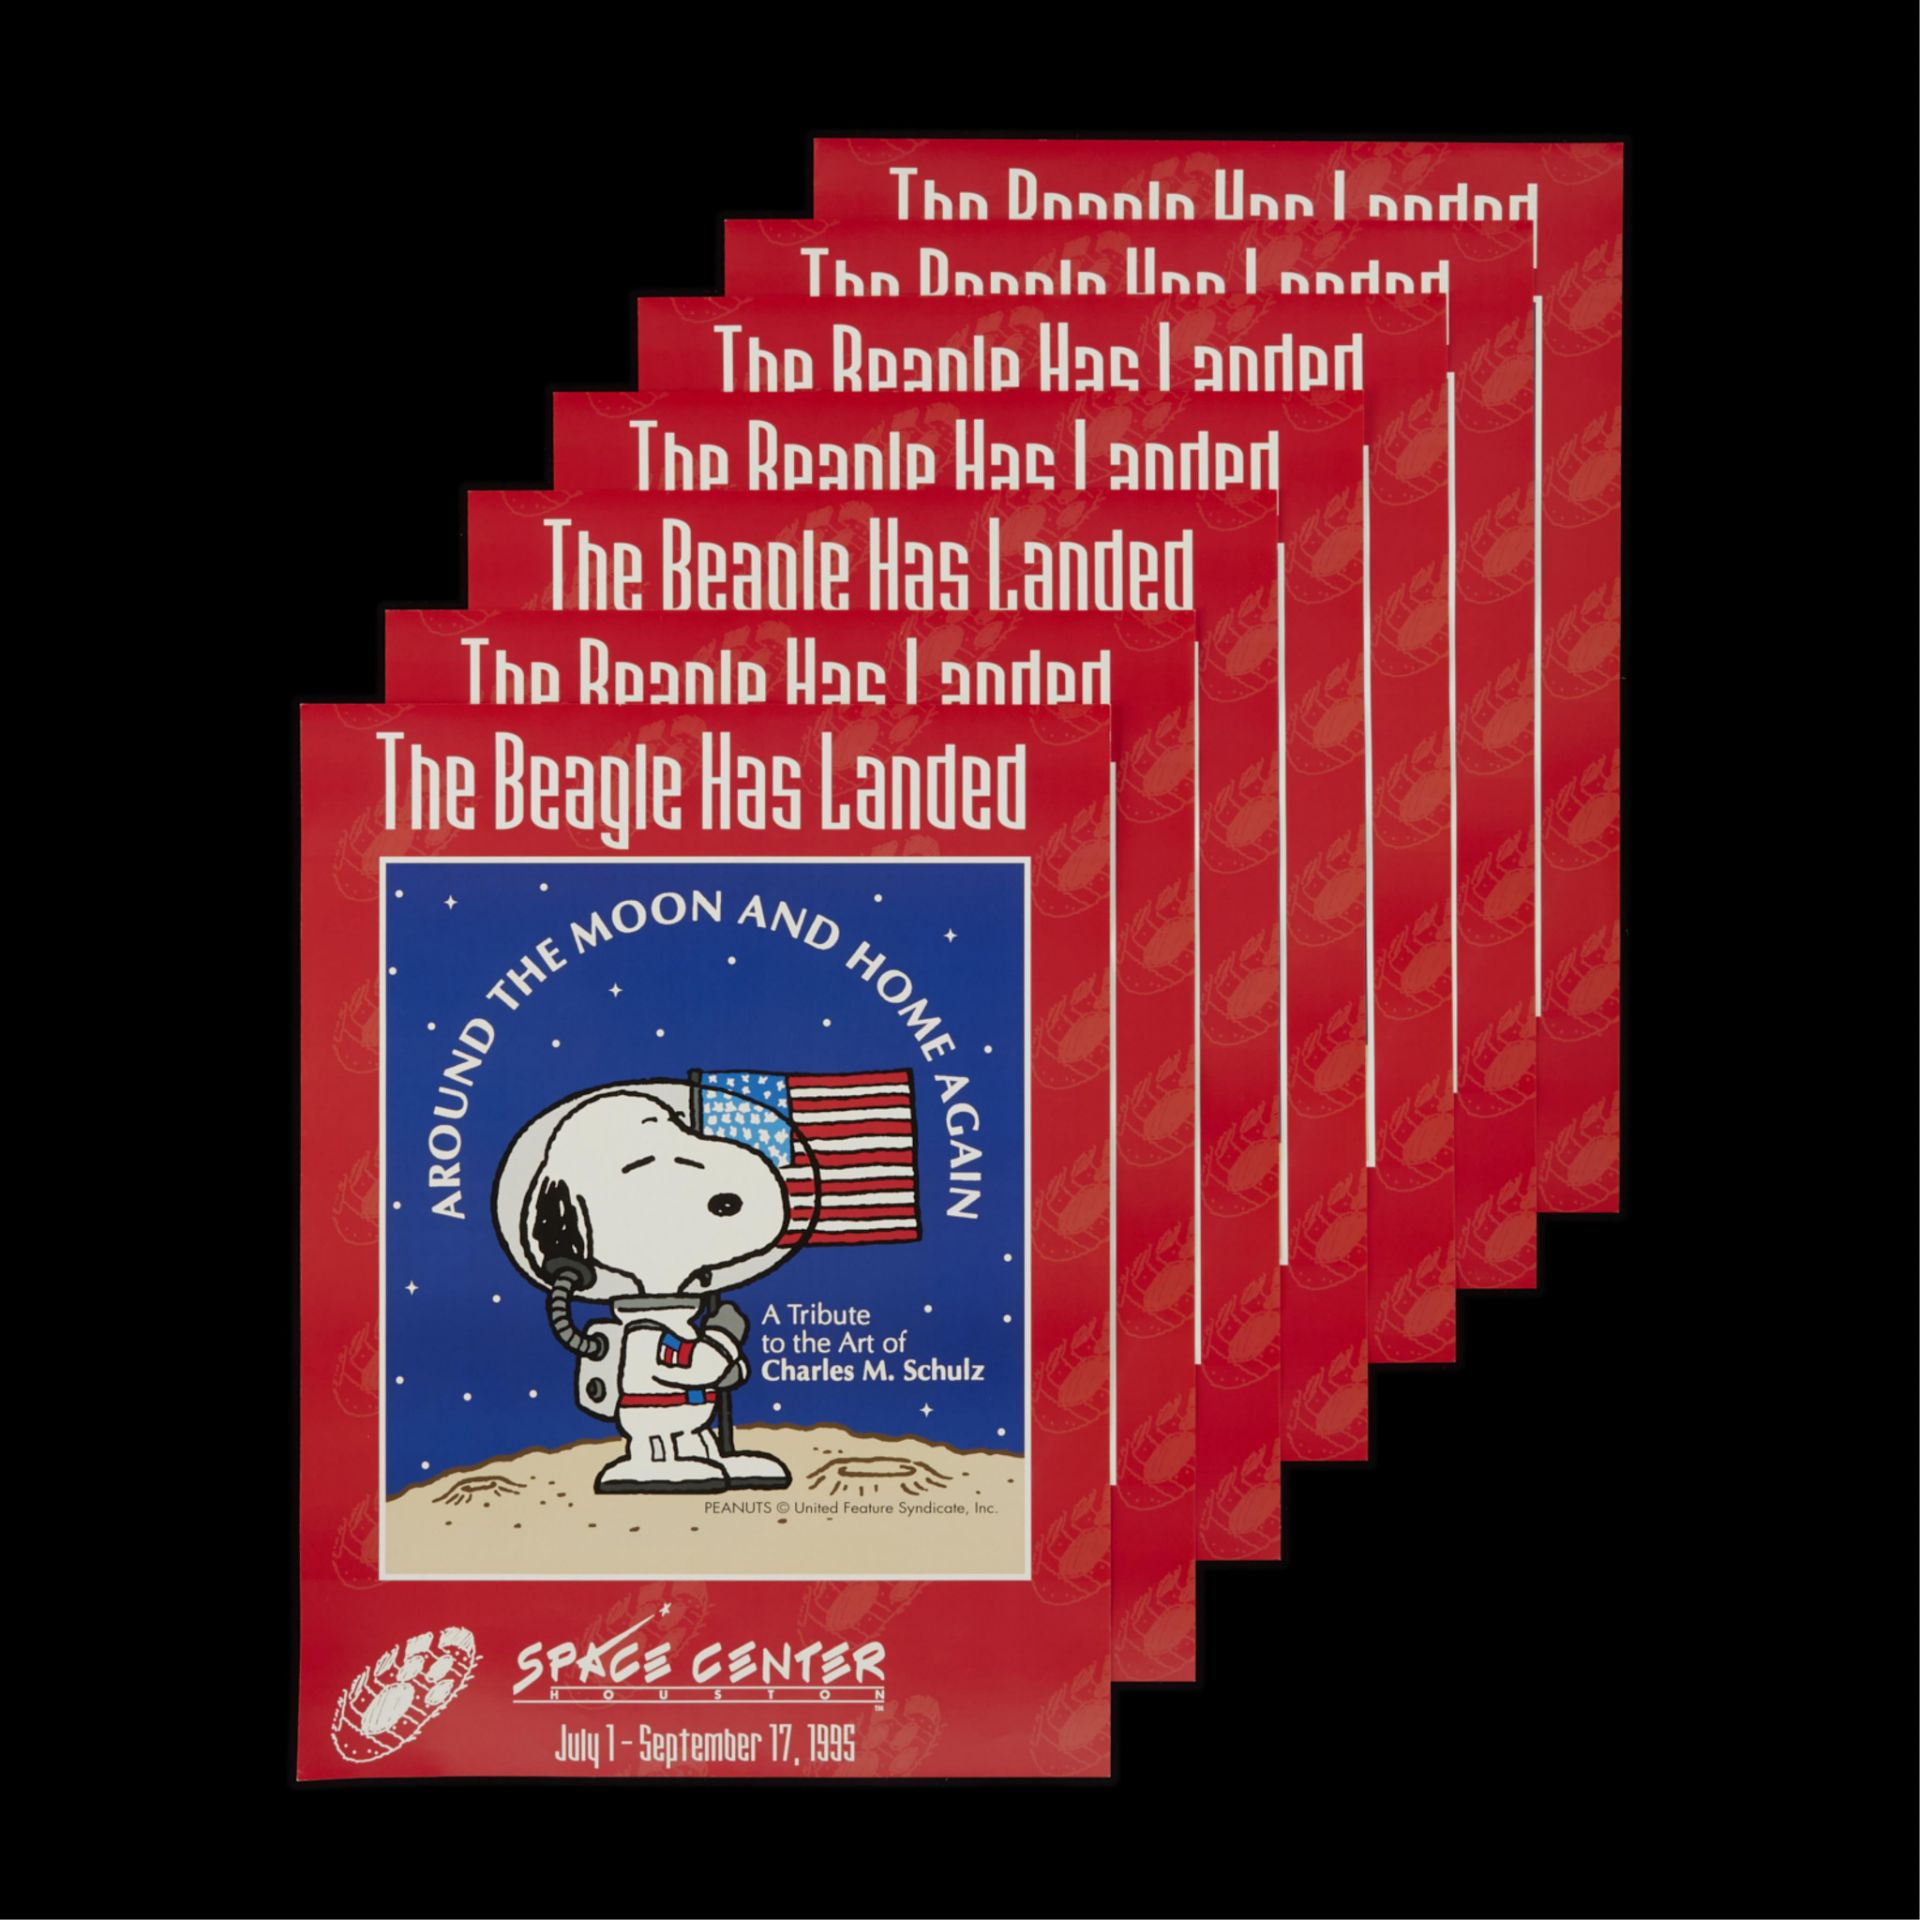 17 Charles Schulz Tribute Exhibition Posters - Image 7 of 8